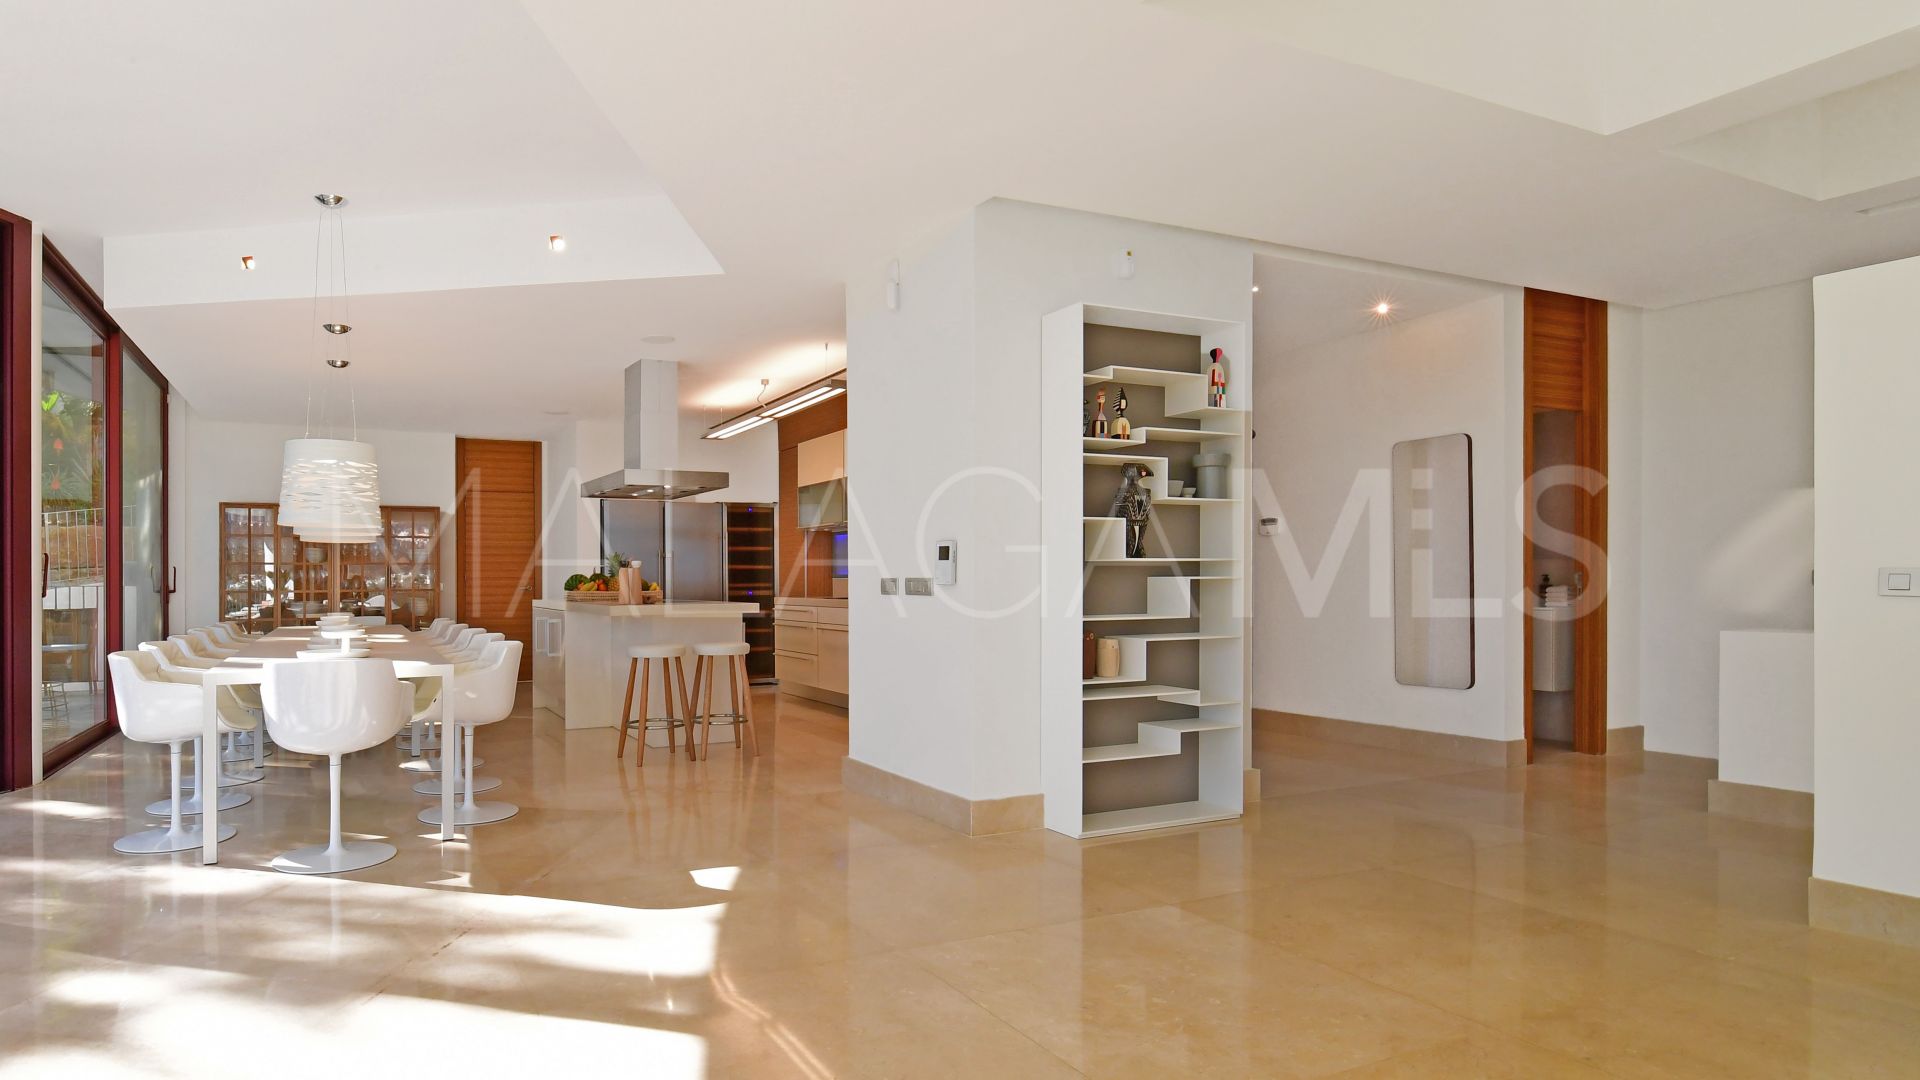 Villa with 7 bedrooms for sale in Nueva Andalucia